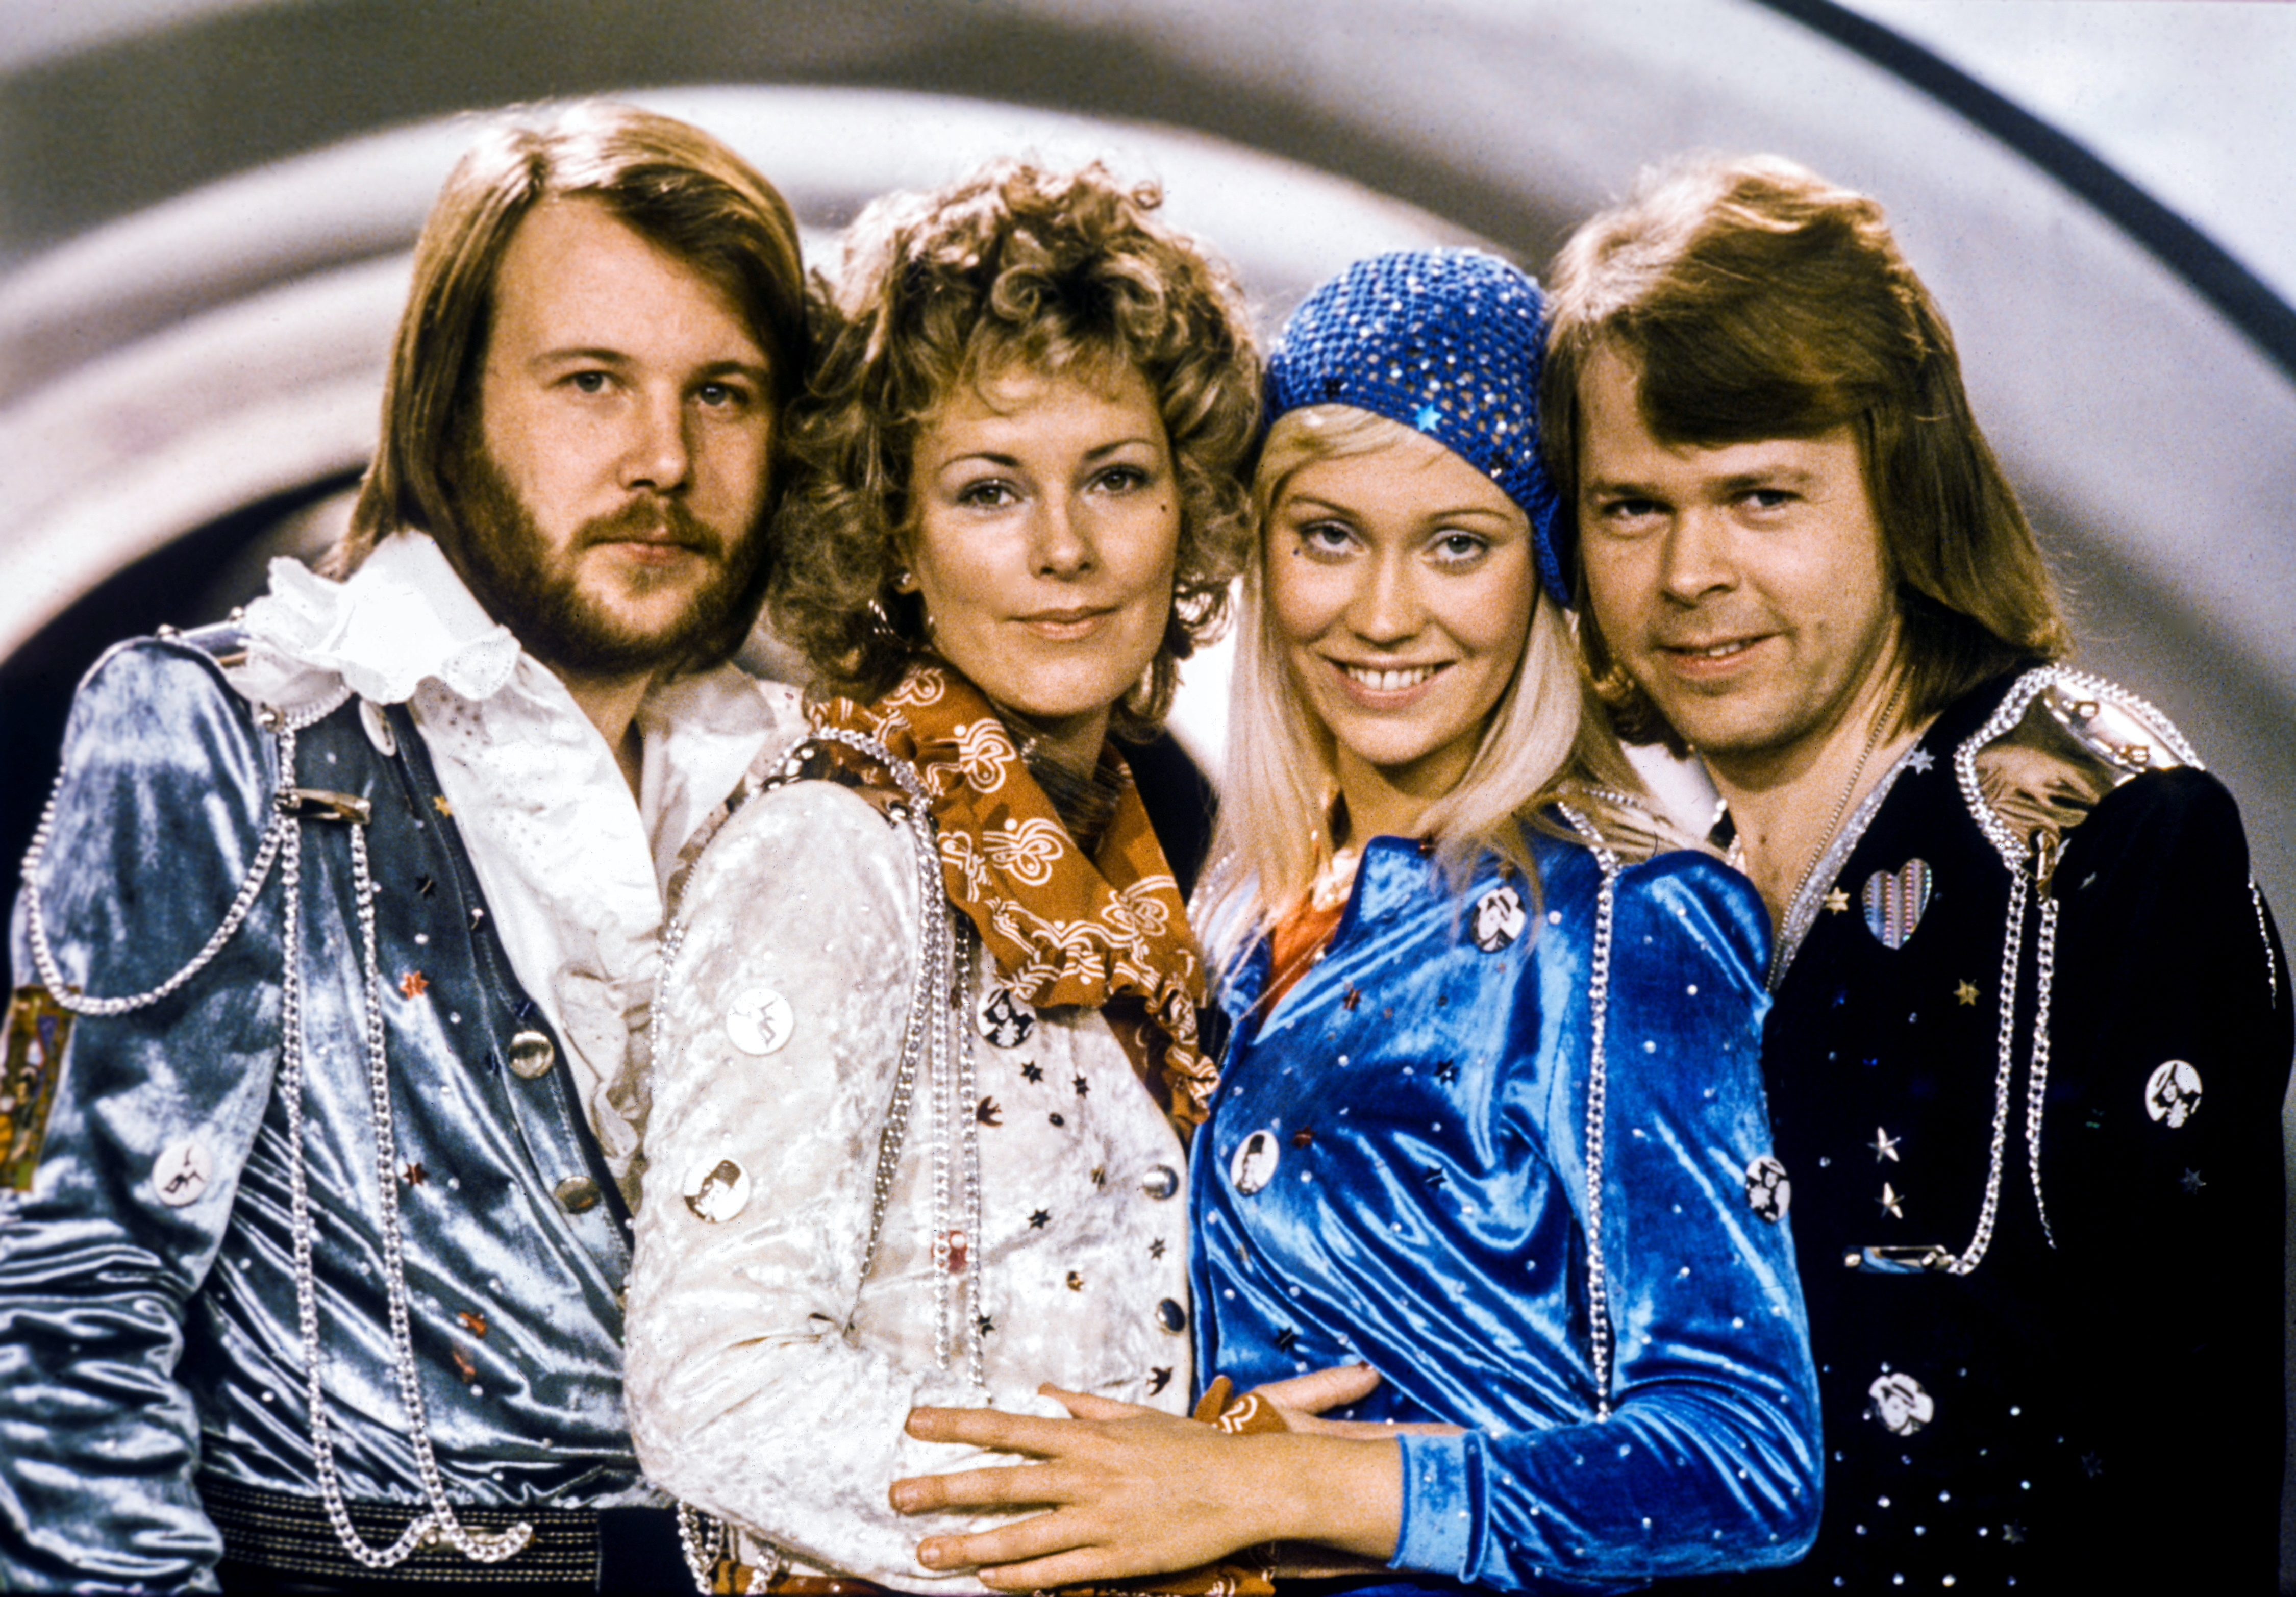 Here they go again – ABBA reunite for first new album in 40 years